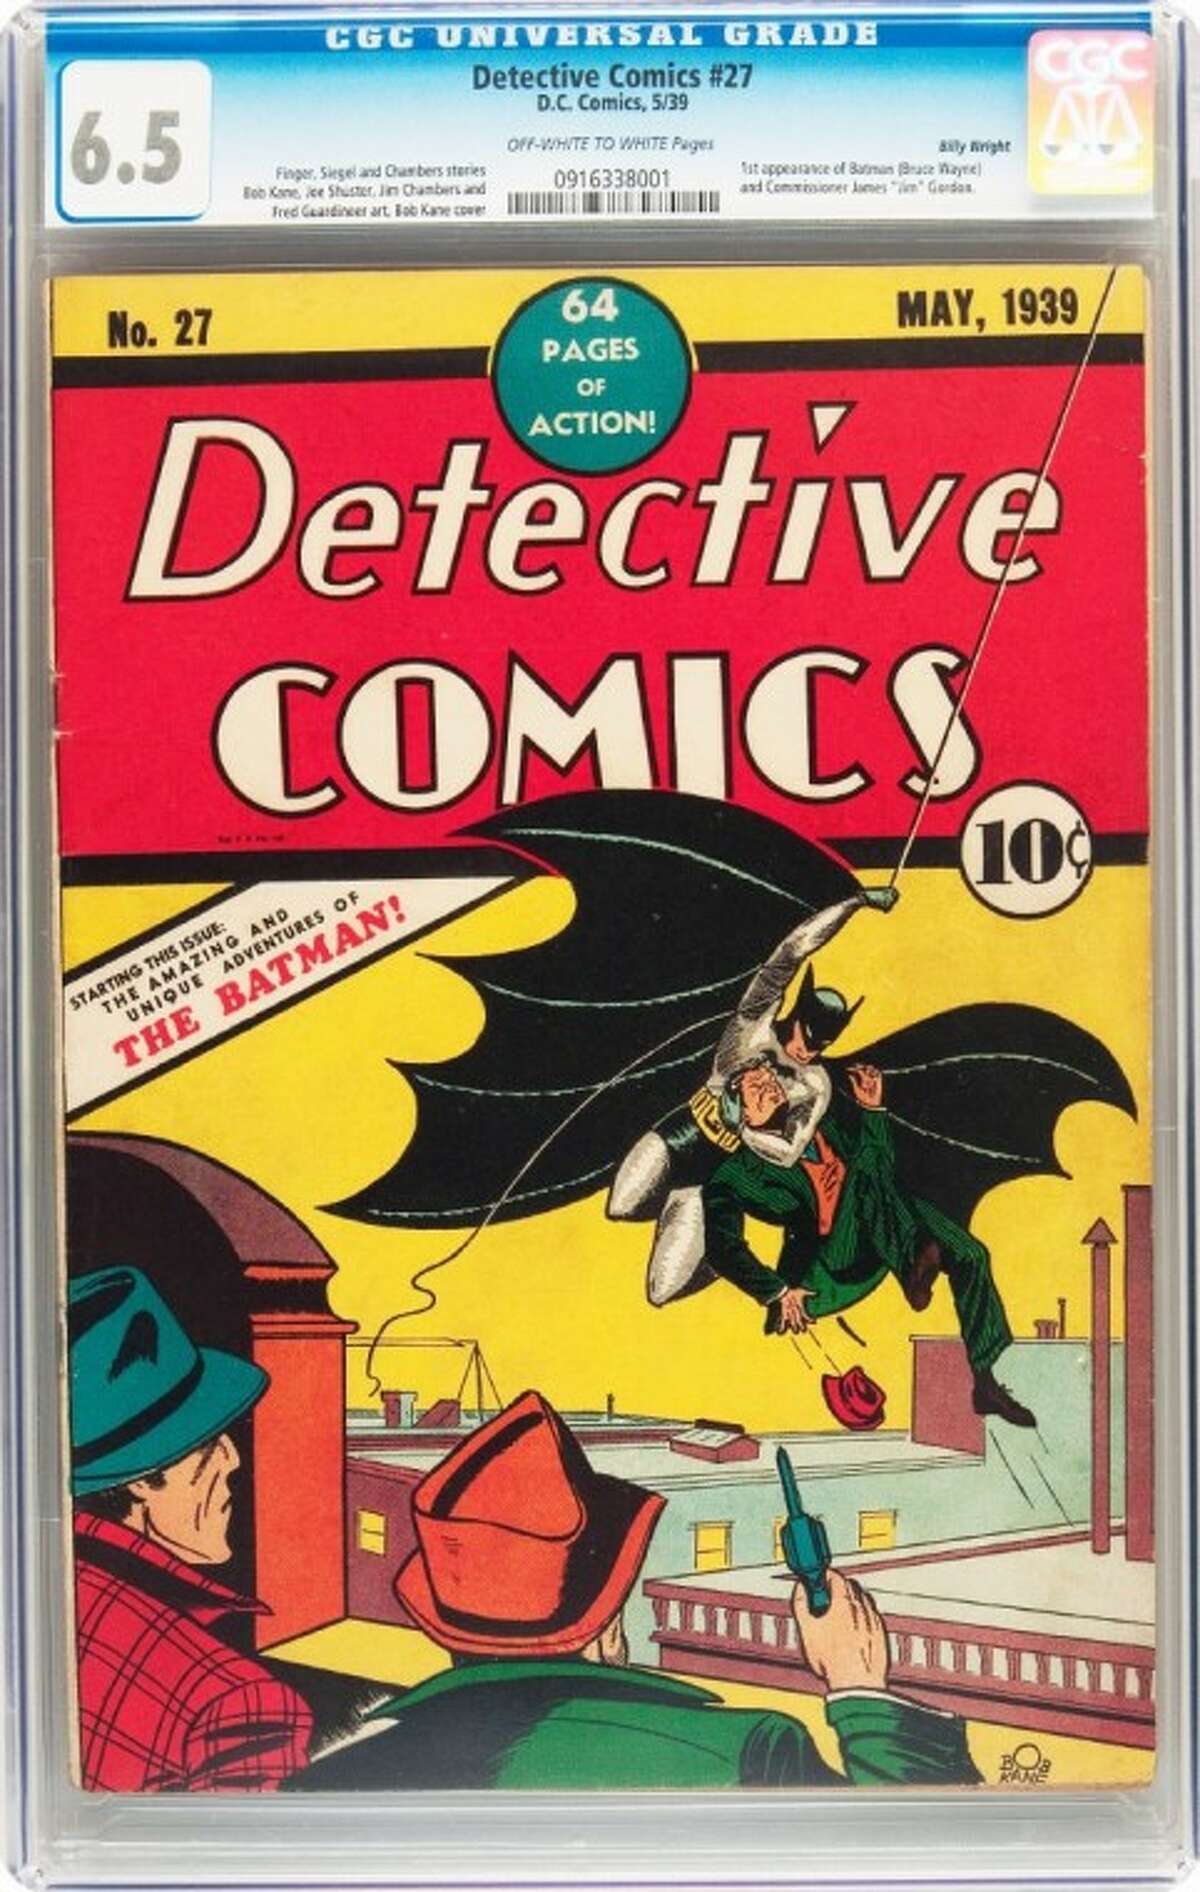 This Feb. 13 handout photo provided by Heritage Auction, shows the CGC-Certified 6.5 copy of Detective Comics #27 from the Billy Wright Collection at Heritage Auctions in Dallas.